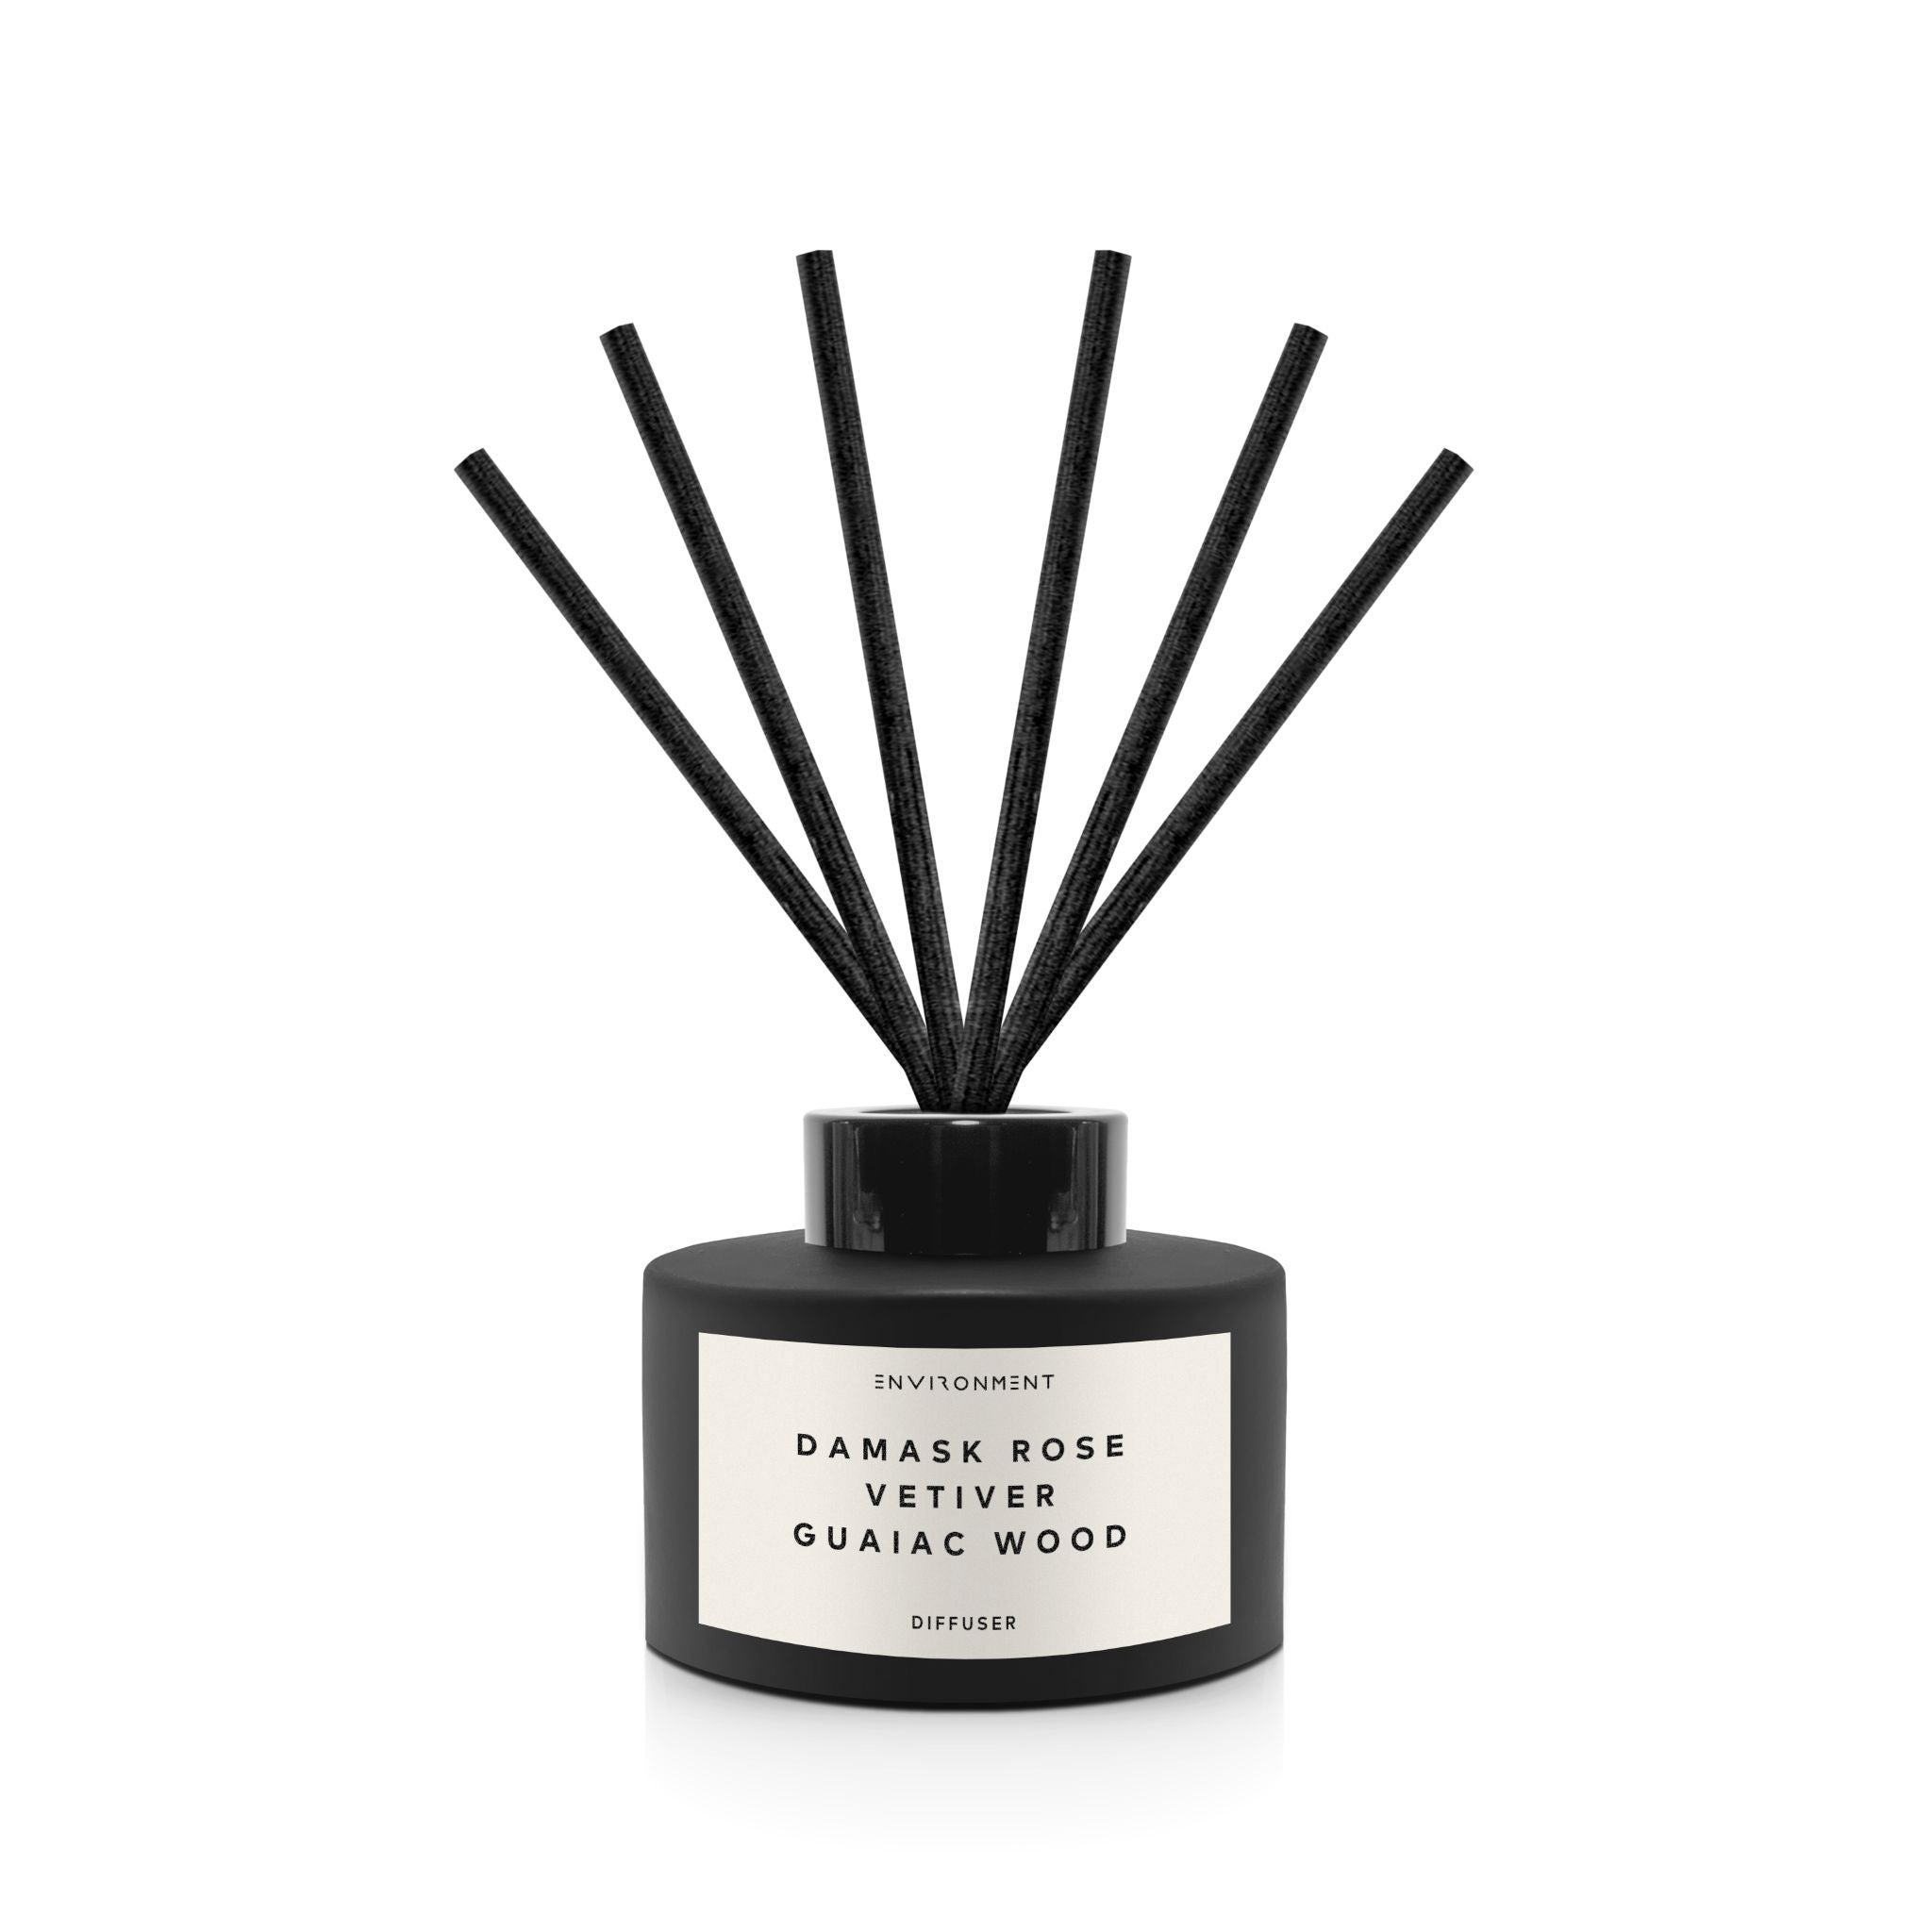 Damask Rose | Vetiver | Guaiac Wood Diffuser (Inspired by Le Labo Rose 31® and Fairmont Hotel®)